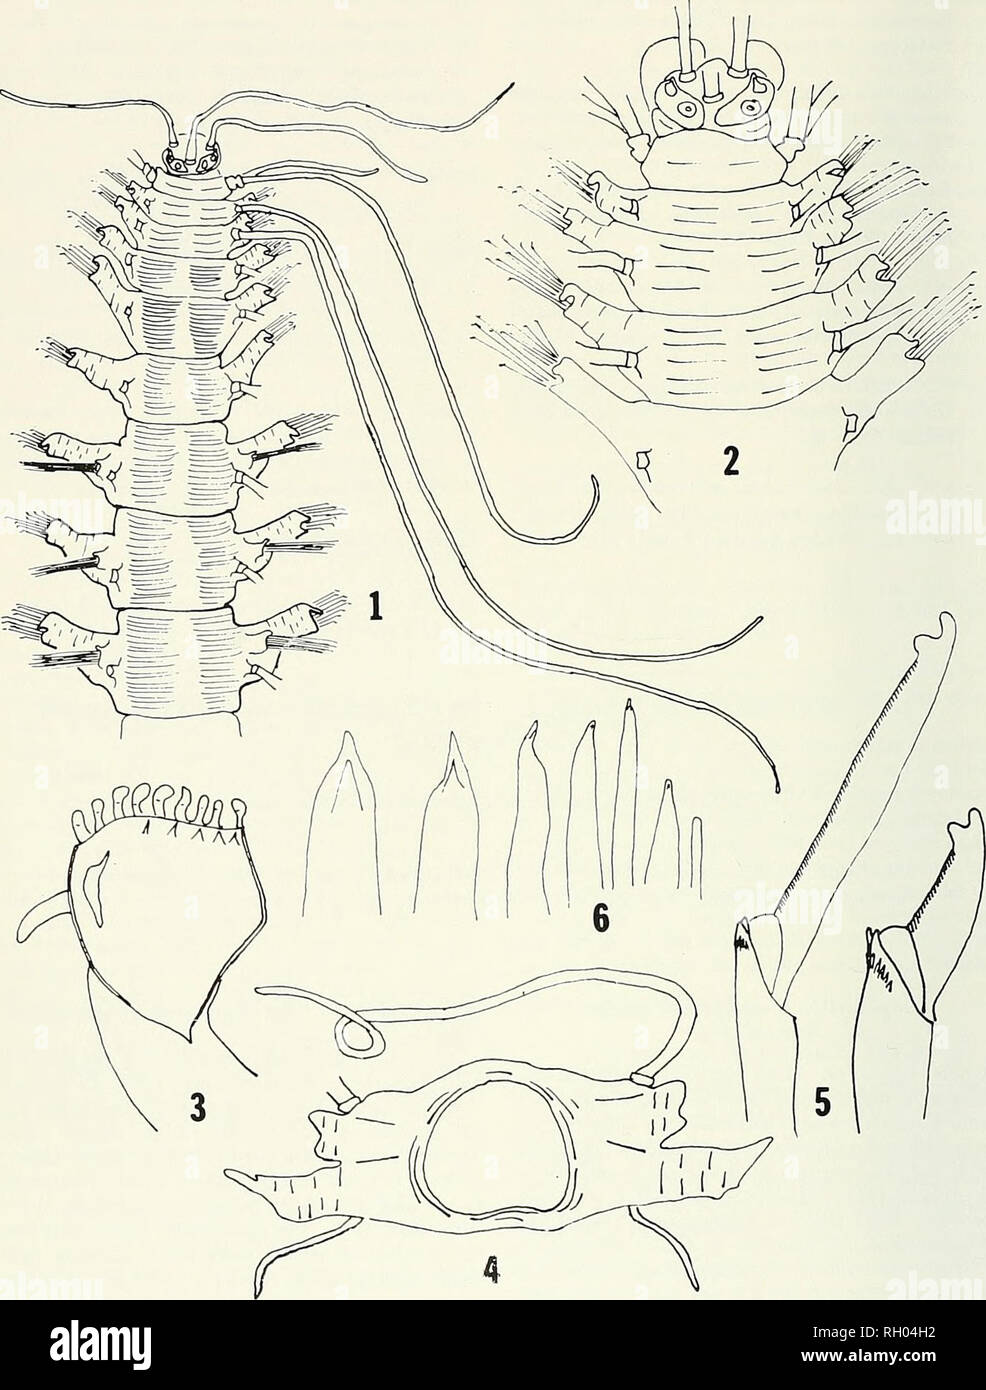 . Bulletin. Science; Natural history; Natural history. 20 BULLETIN SOUTHERN CALIFORNIA ACADEMY OF SCIENCES VOLUME 75. Figures 1-6. Dioplosyllis hroacli. new species. 7, Dorsal view of anterior end, x 10; 2, Dorsal view of anterior end showing prostomial details, X 20; 3. Distal end of pharynx showing digiti- form process, X40; 4, Seventh setiger, anterior view; 5, Compound falcigers from neuropodium of seventh setiger, X500; 6, Neuropodial acicula from seventh segment, X500.. Please note that these images are extracted from scanned page images that may have been digitally enhanced for readabil Stock Photo